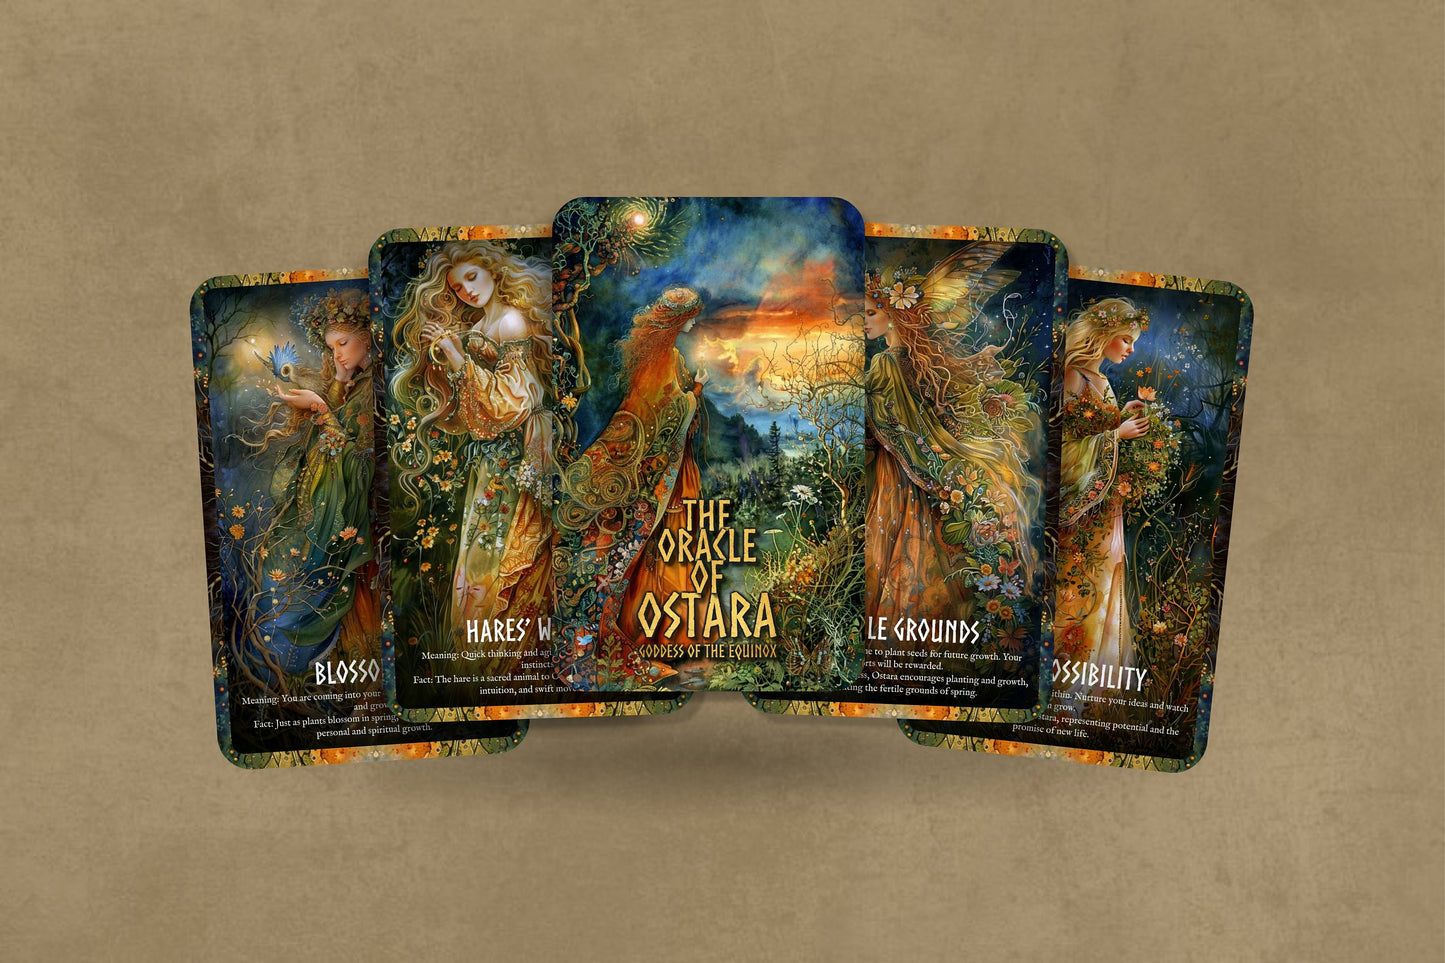 The Oracle of Ostara - Goddesses of the Equinox  - Oracle cards - Nordic Goddess Insights - Divination Tools